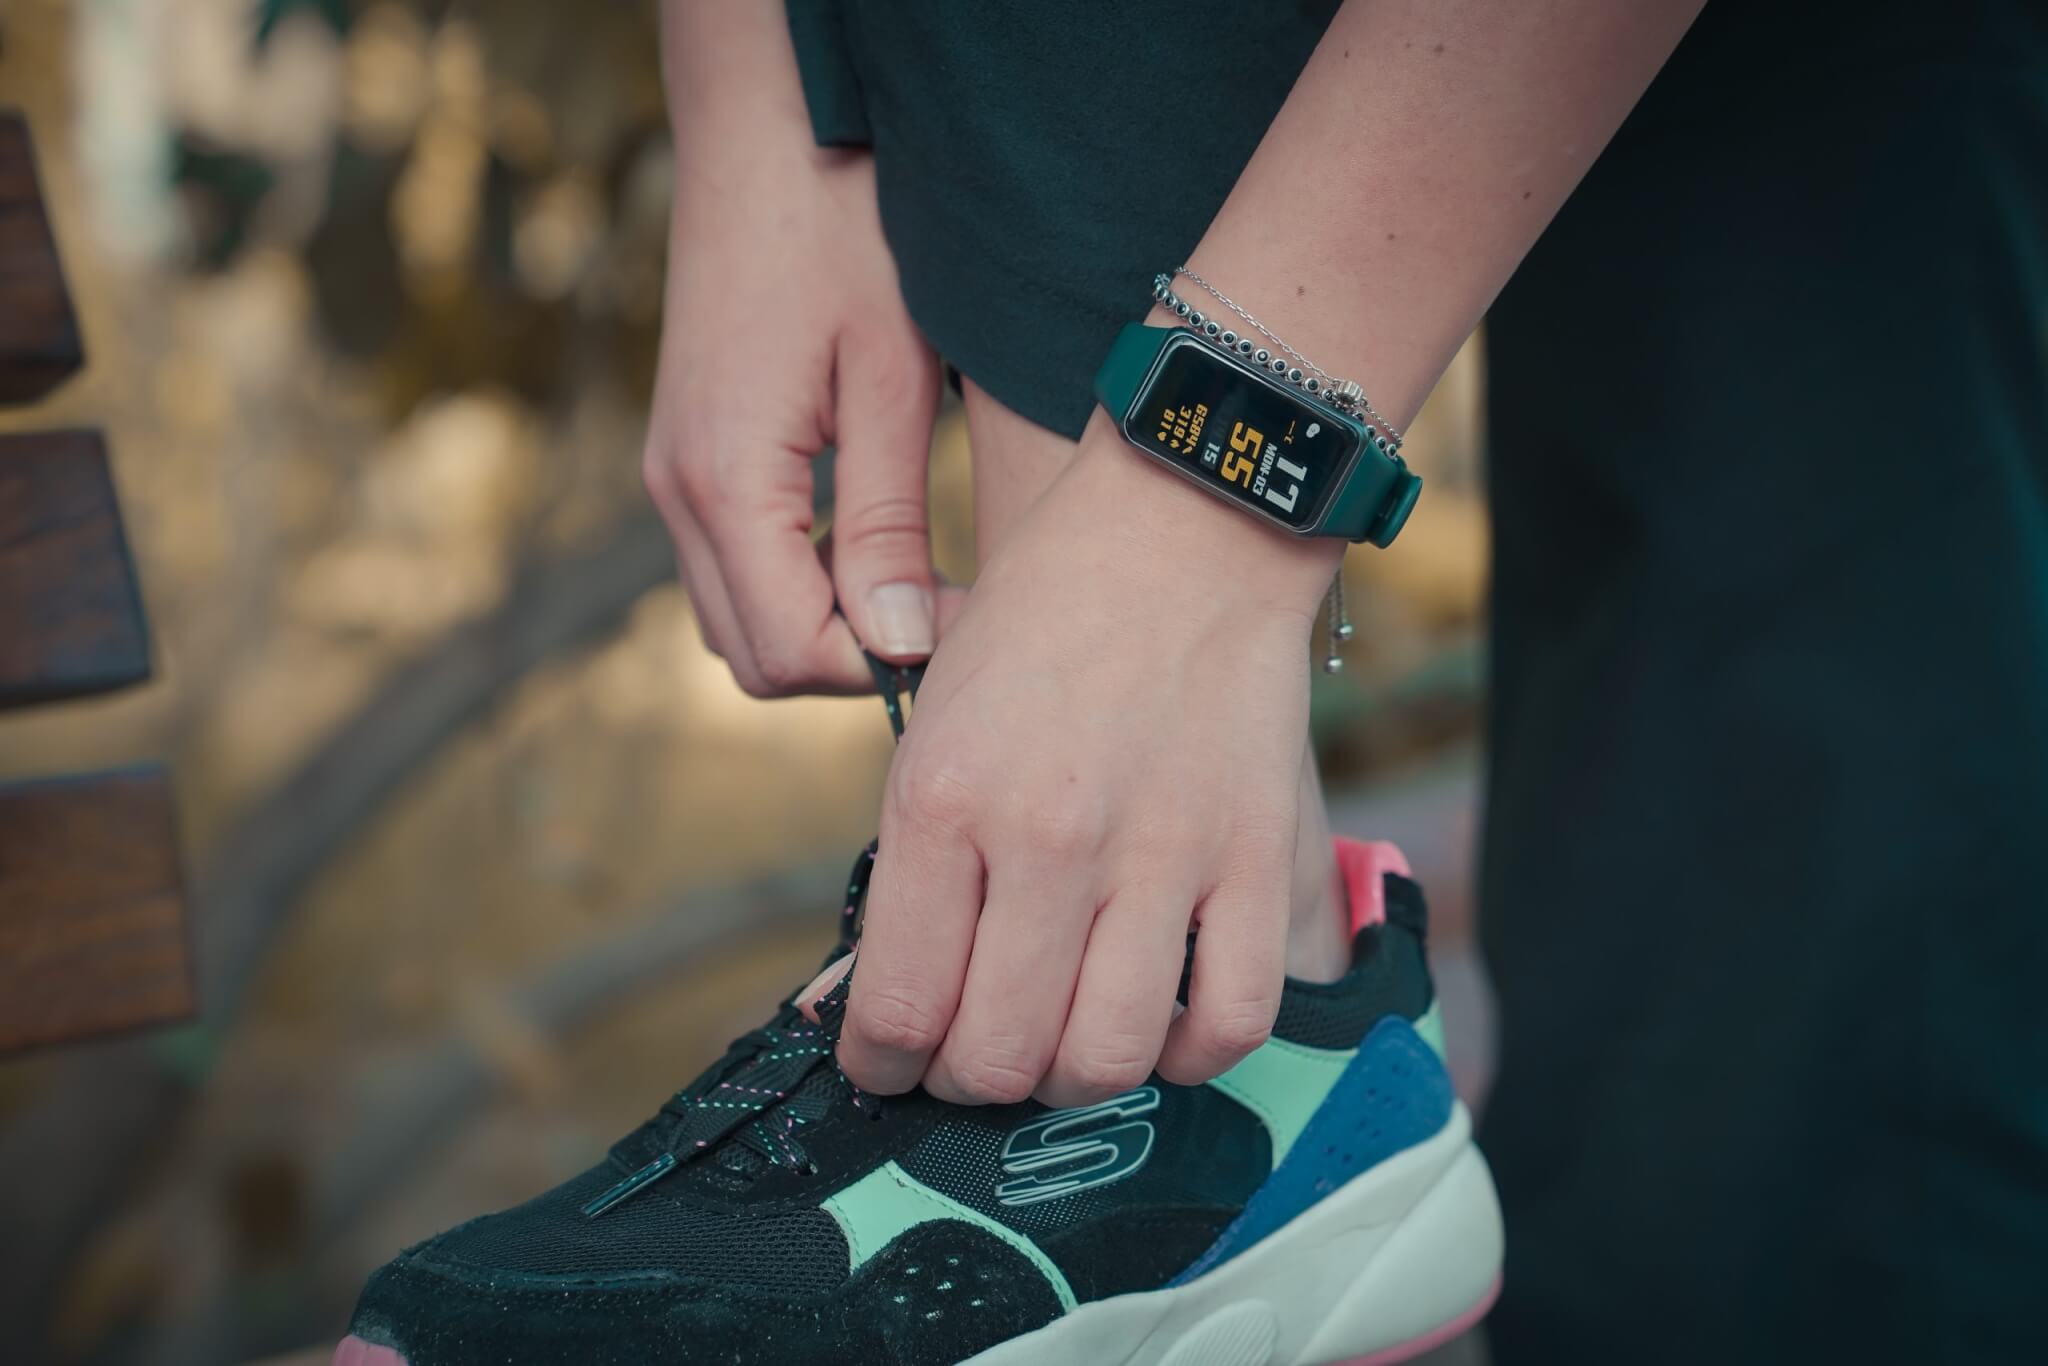 Lace-up sneakers for runners, wearing fitness trackers before exercise